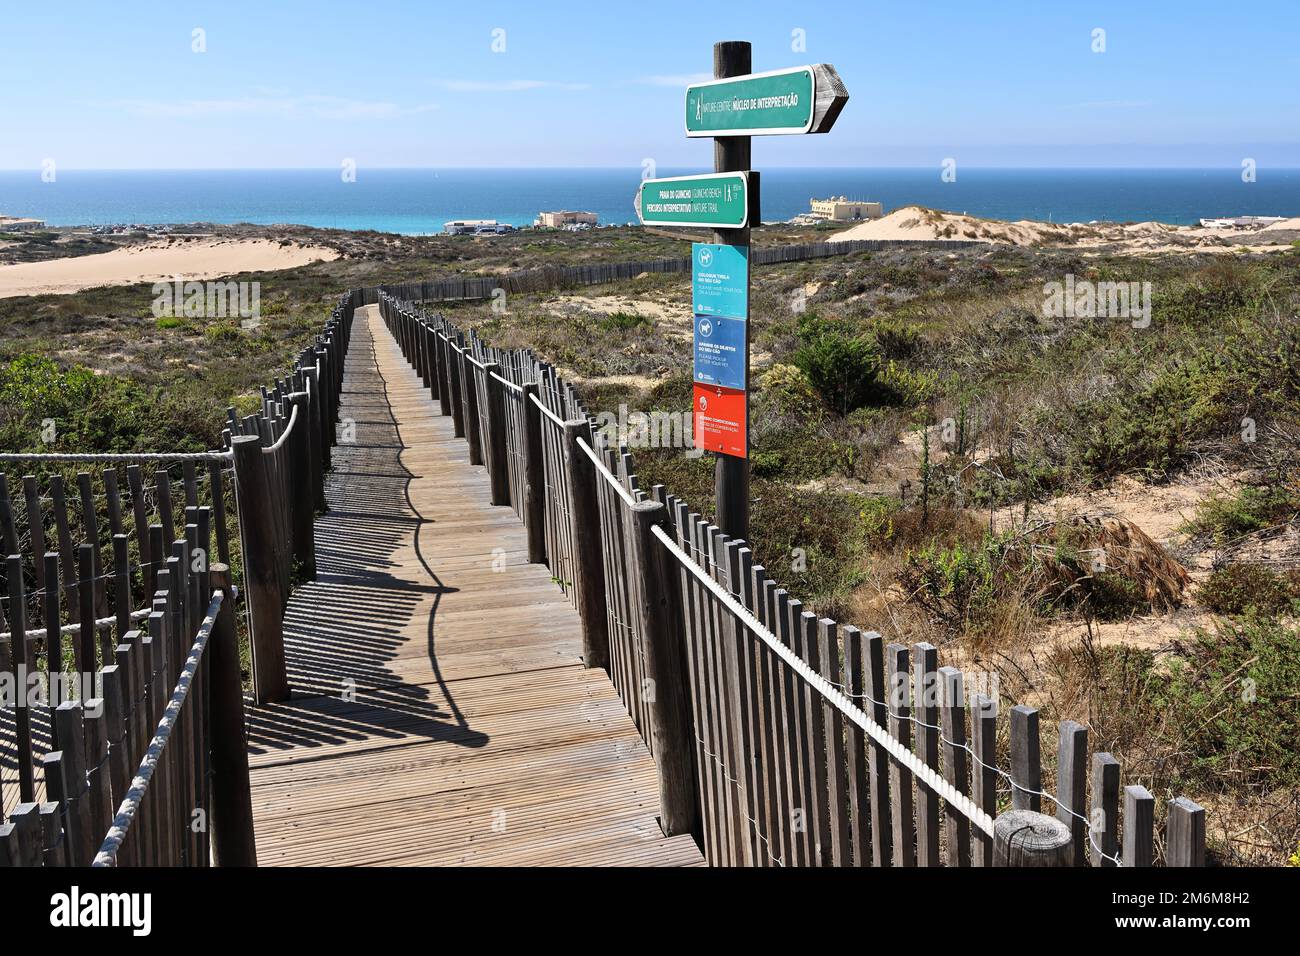 A boardwalk in the Cresmina dunes in Cascais, Portugal Stock Photo